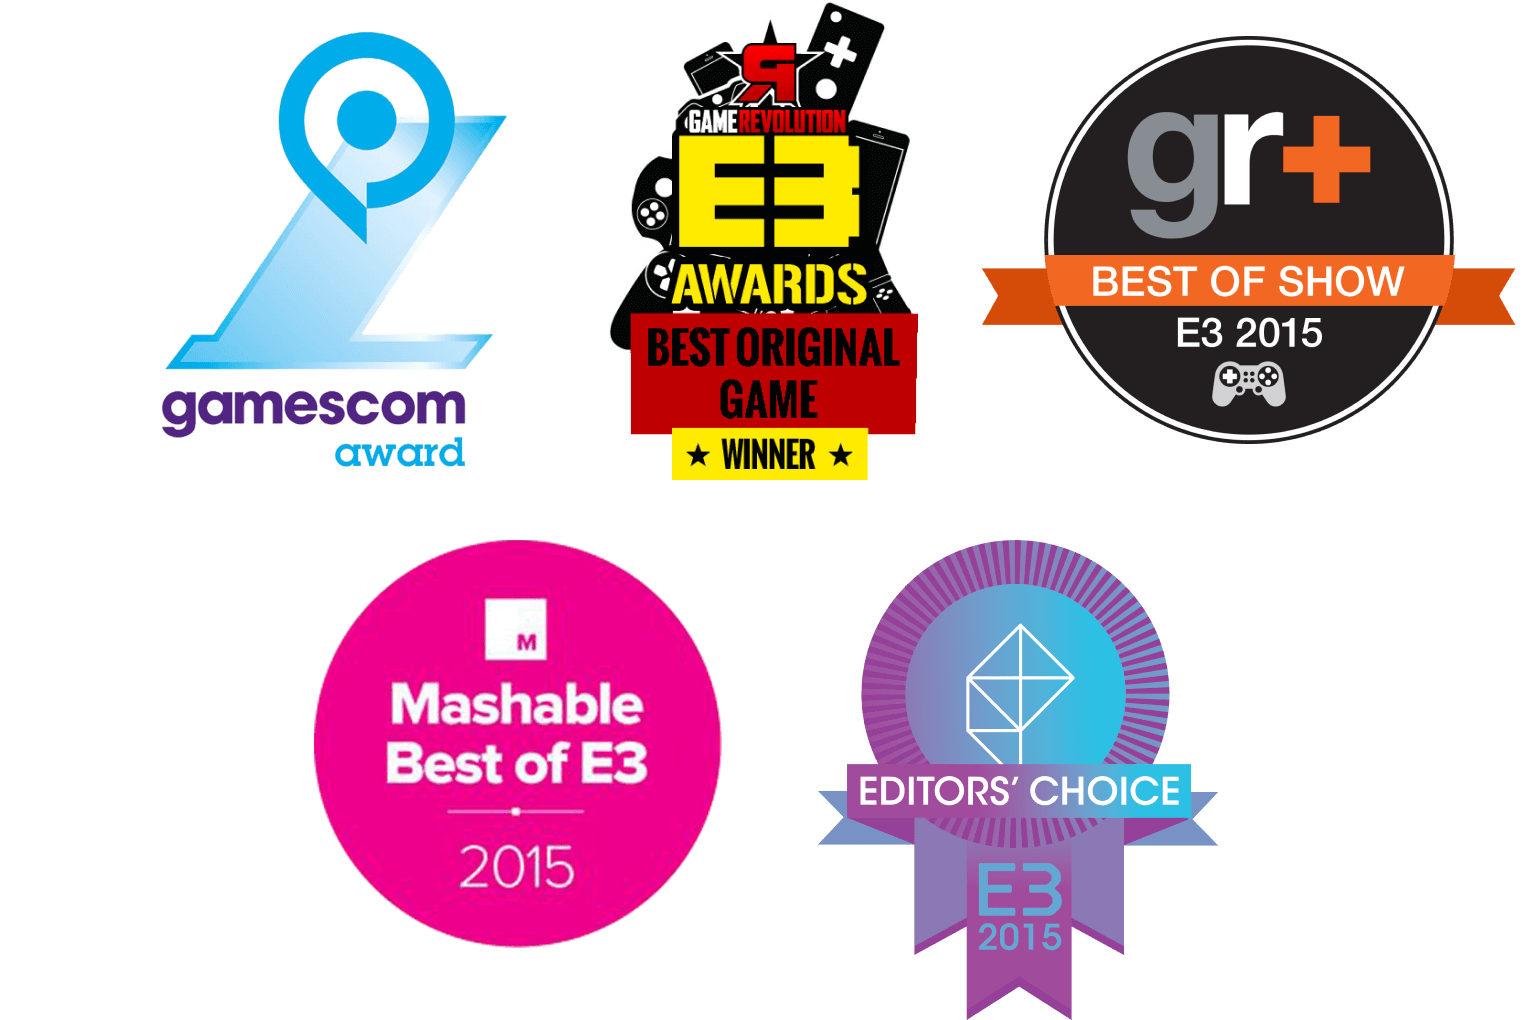 Best of 2015 Awards: Game of the Year - GameRevolution